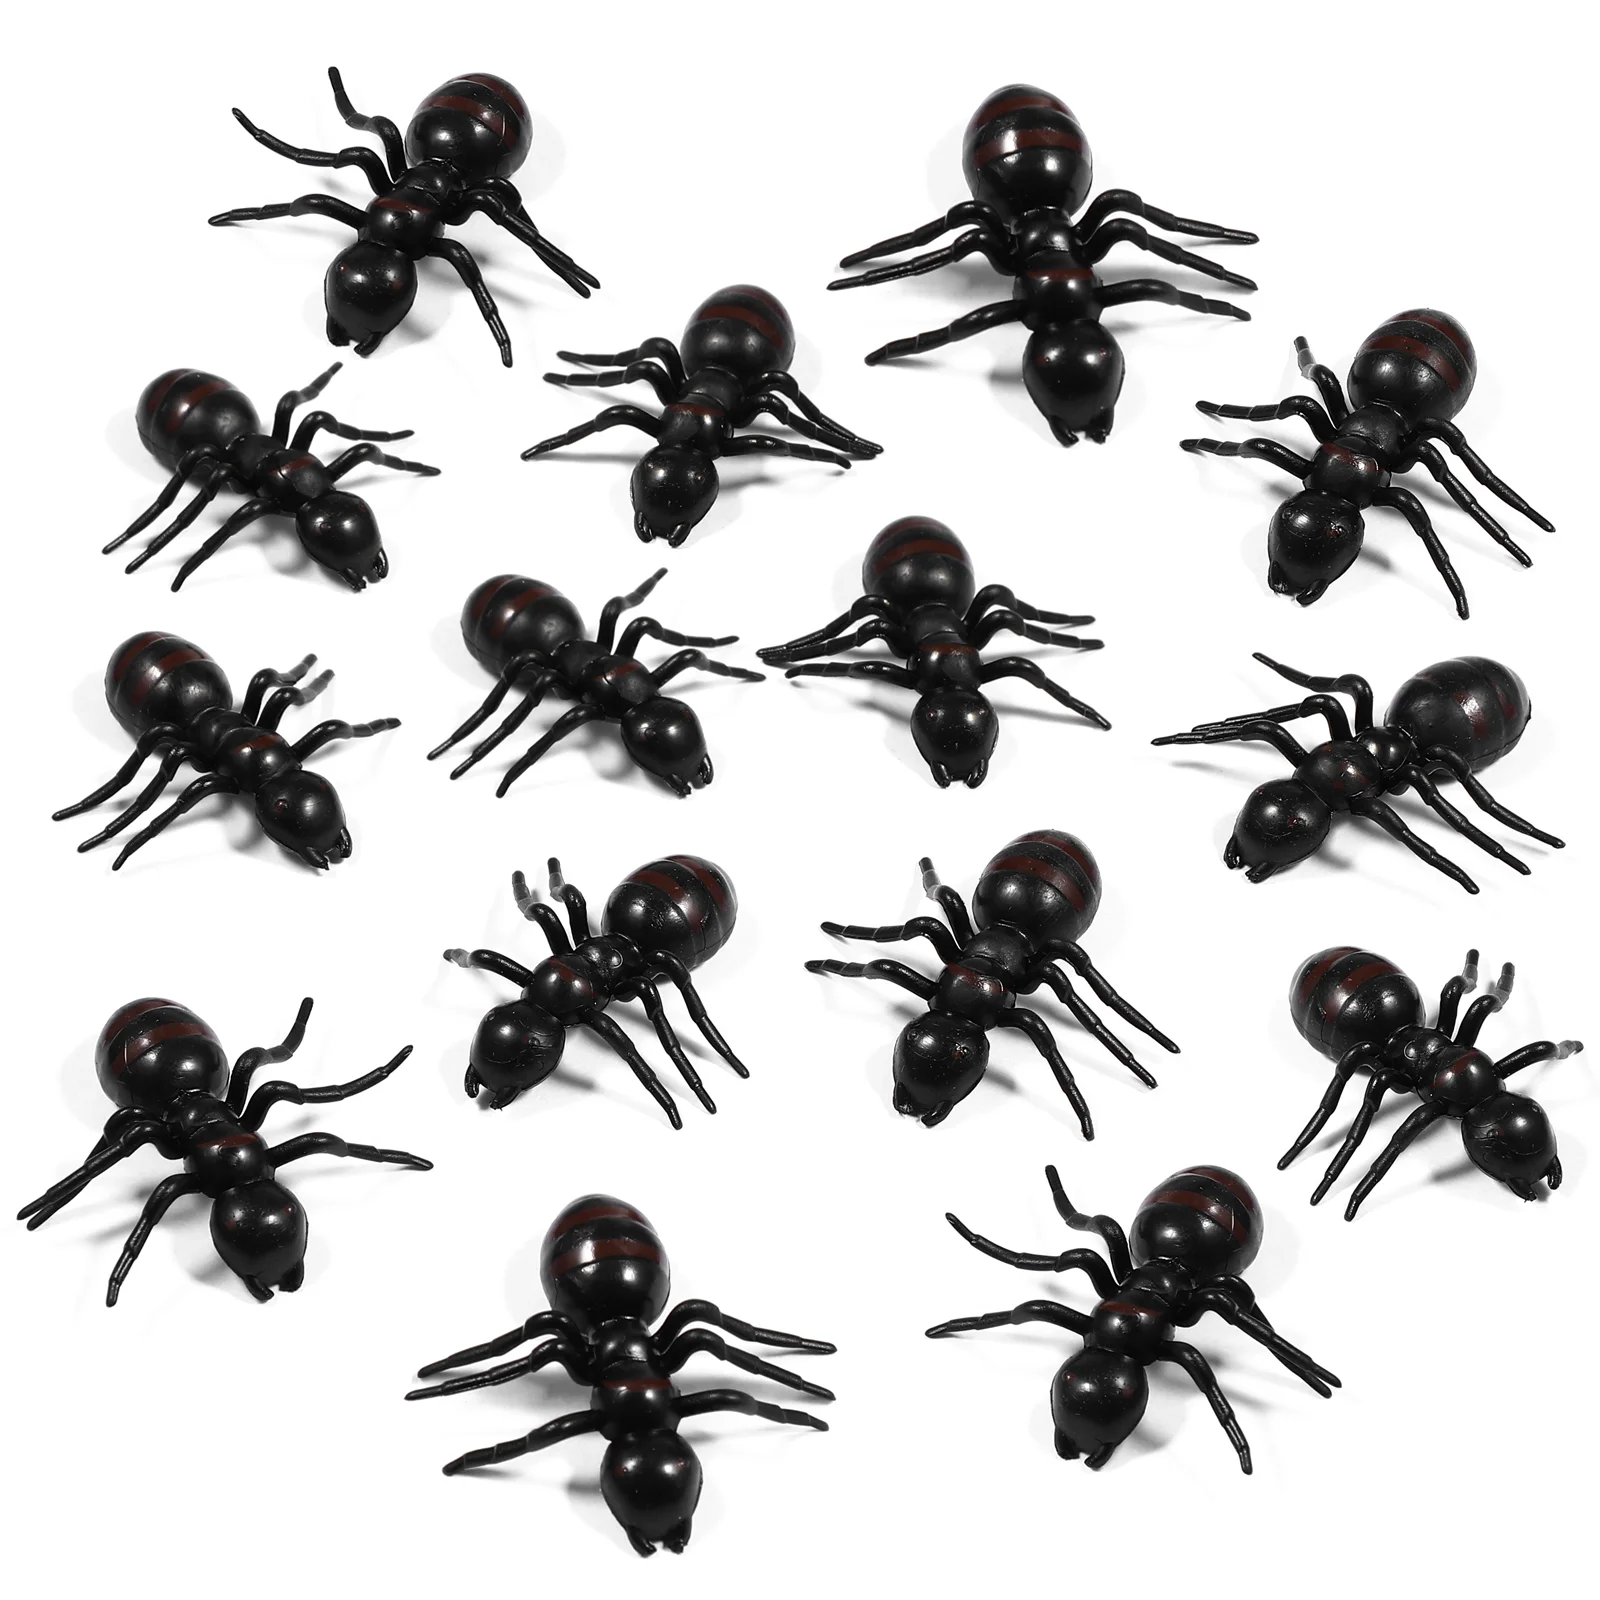 

50Pcs bug Insect Figurine Simulation Bug Model Prop Ant Gag Party Favors for Children Adults ant Black toddler bug toys